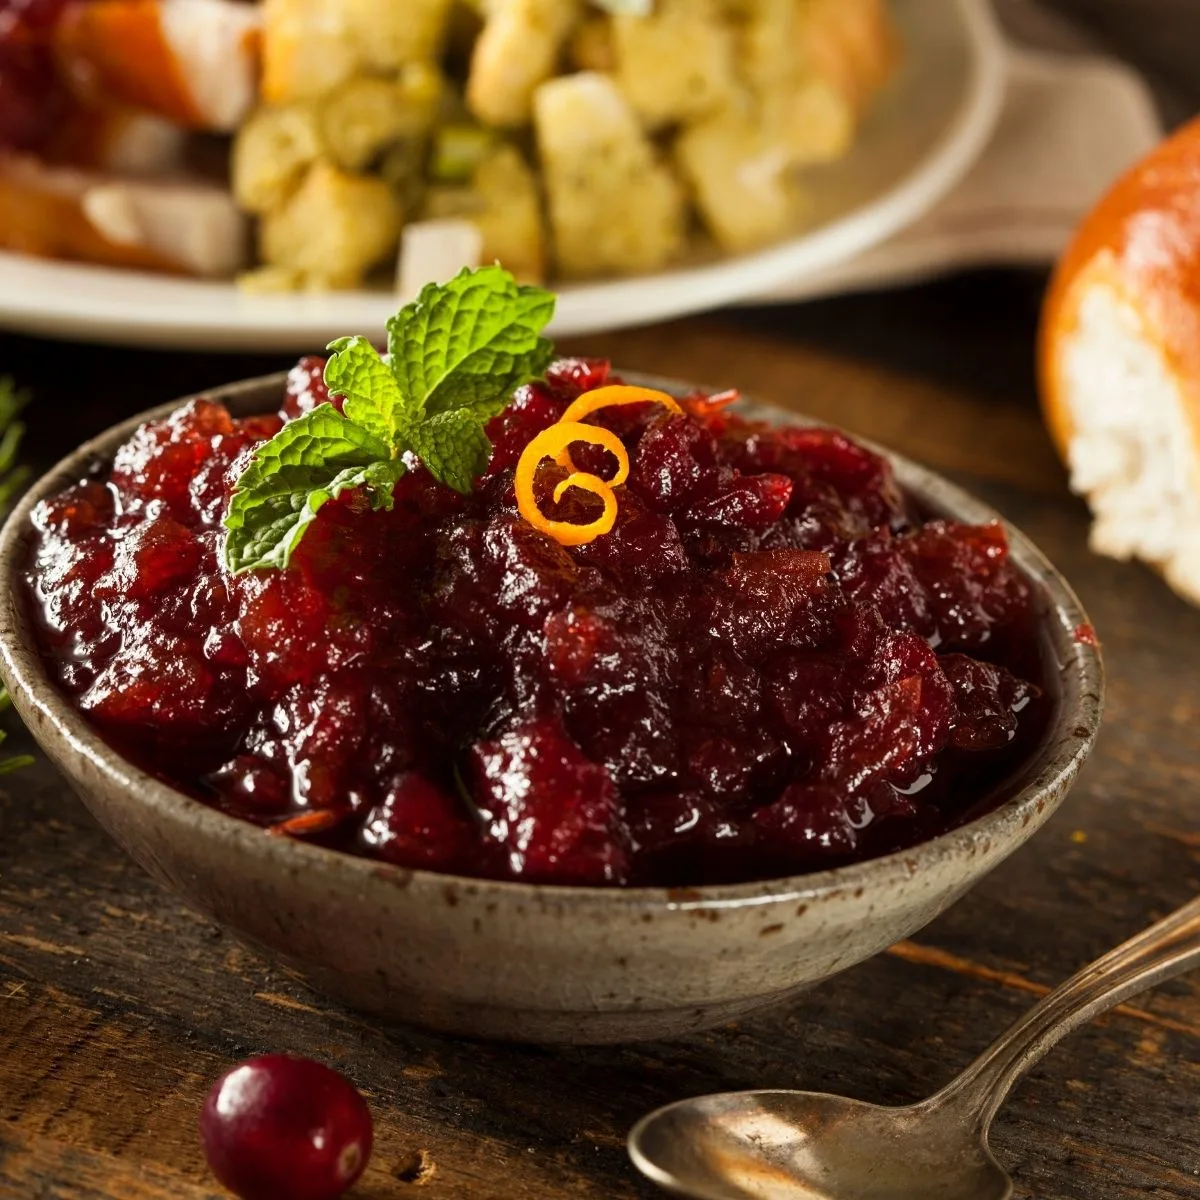 Cranberry sauce in grey bowl with brown specks orange peel garnish on wood table and tarnish spoon